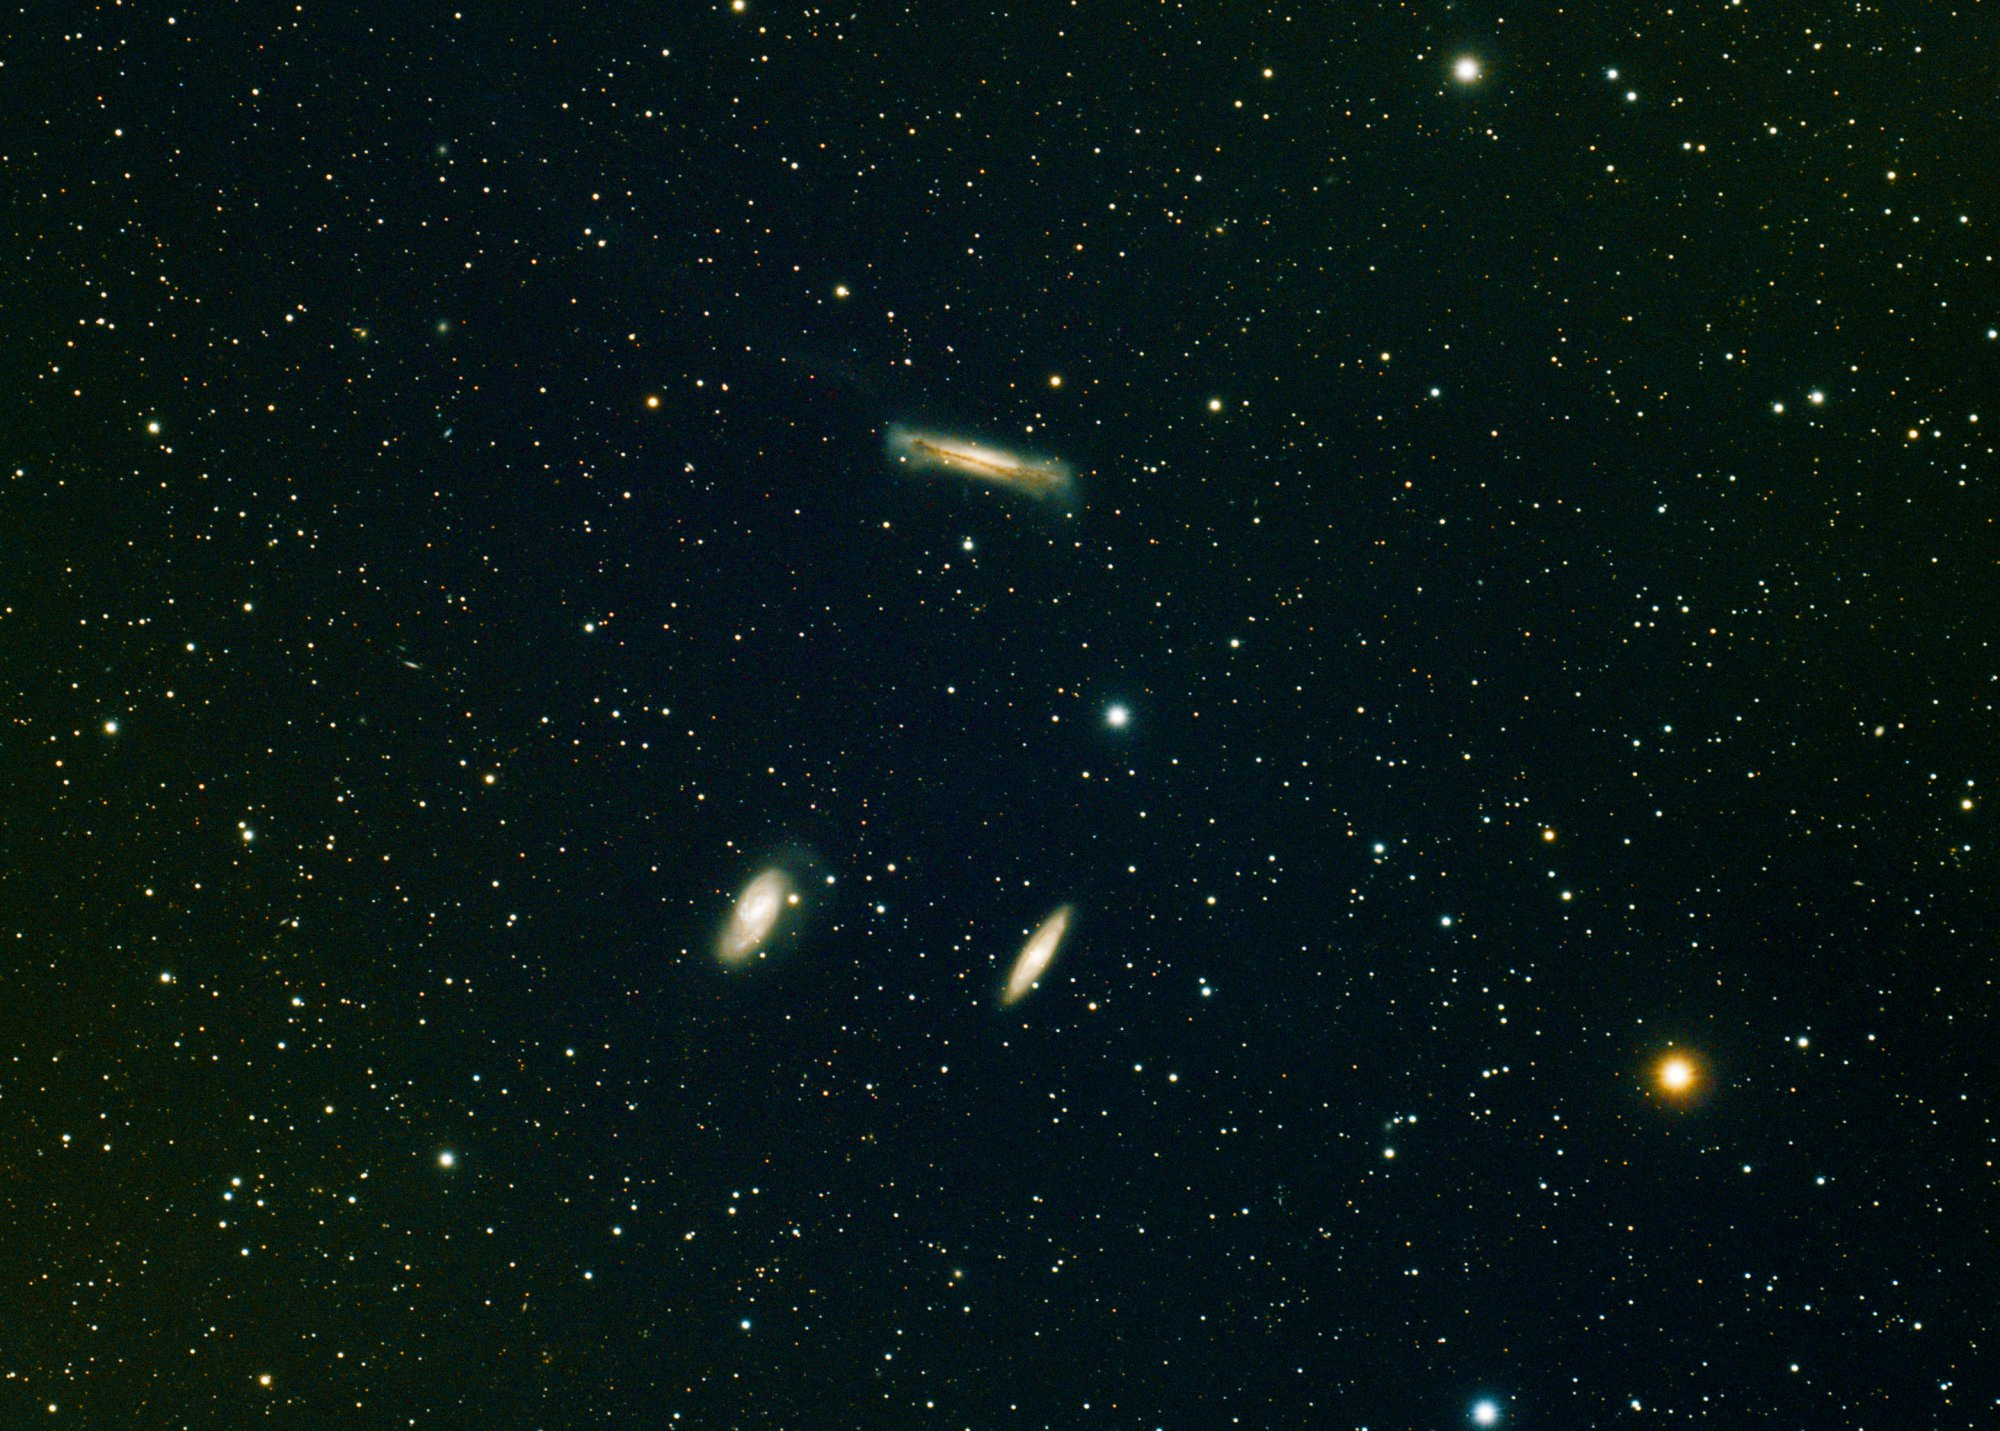 NGC_3628_35X5_MINUTE_MONT_DE_LURE_SIRIPS.thumb.png.dd813f588e00040a7c48bd4bfc6d83c4.jpg.16a27d2c7f025ff77567a417e1fc6597.jpg